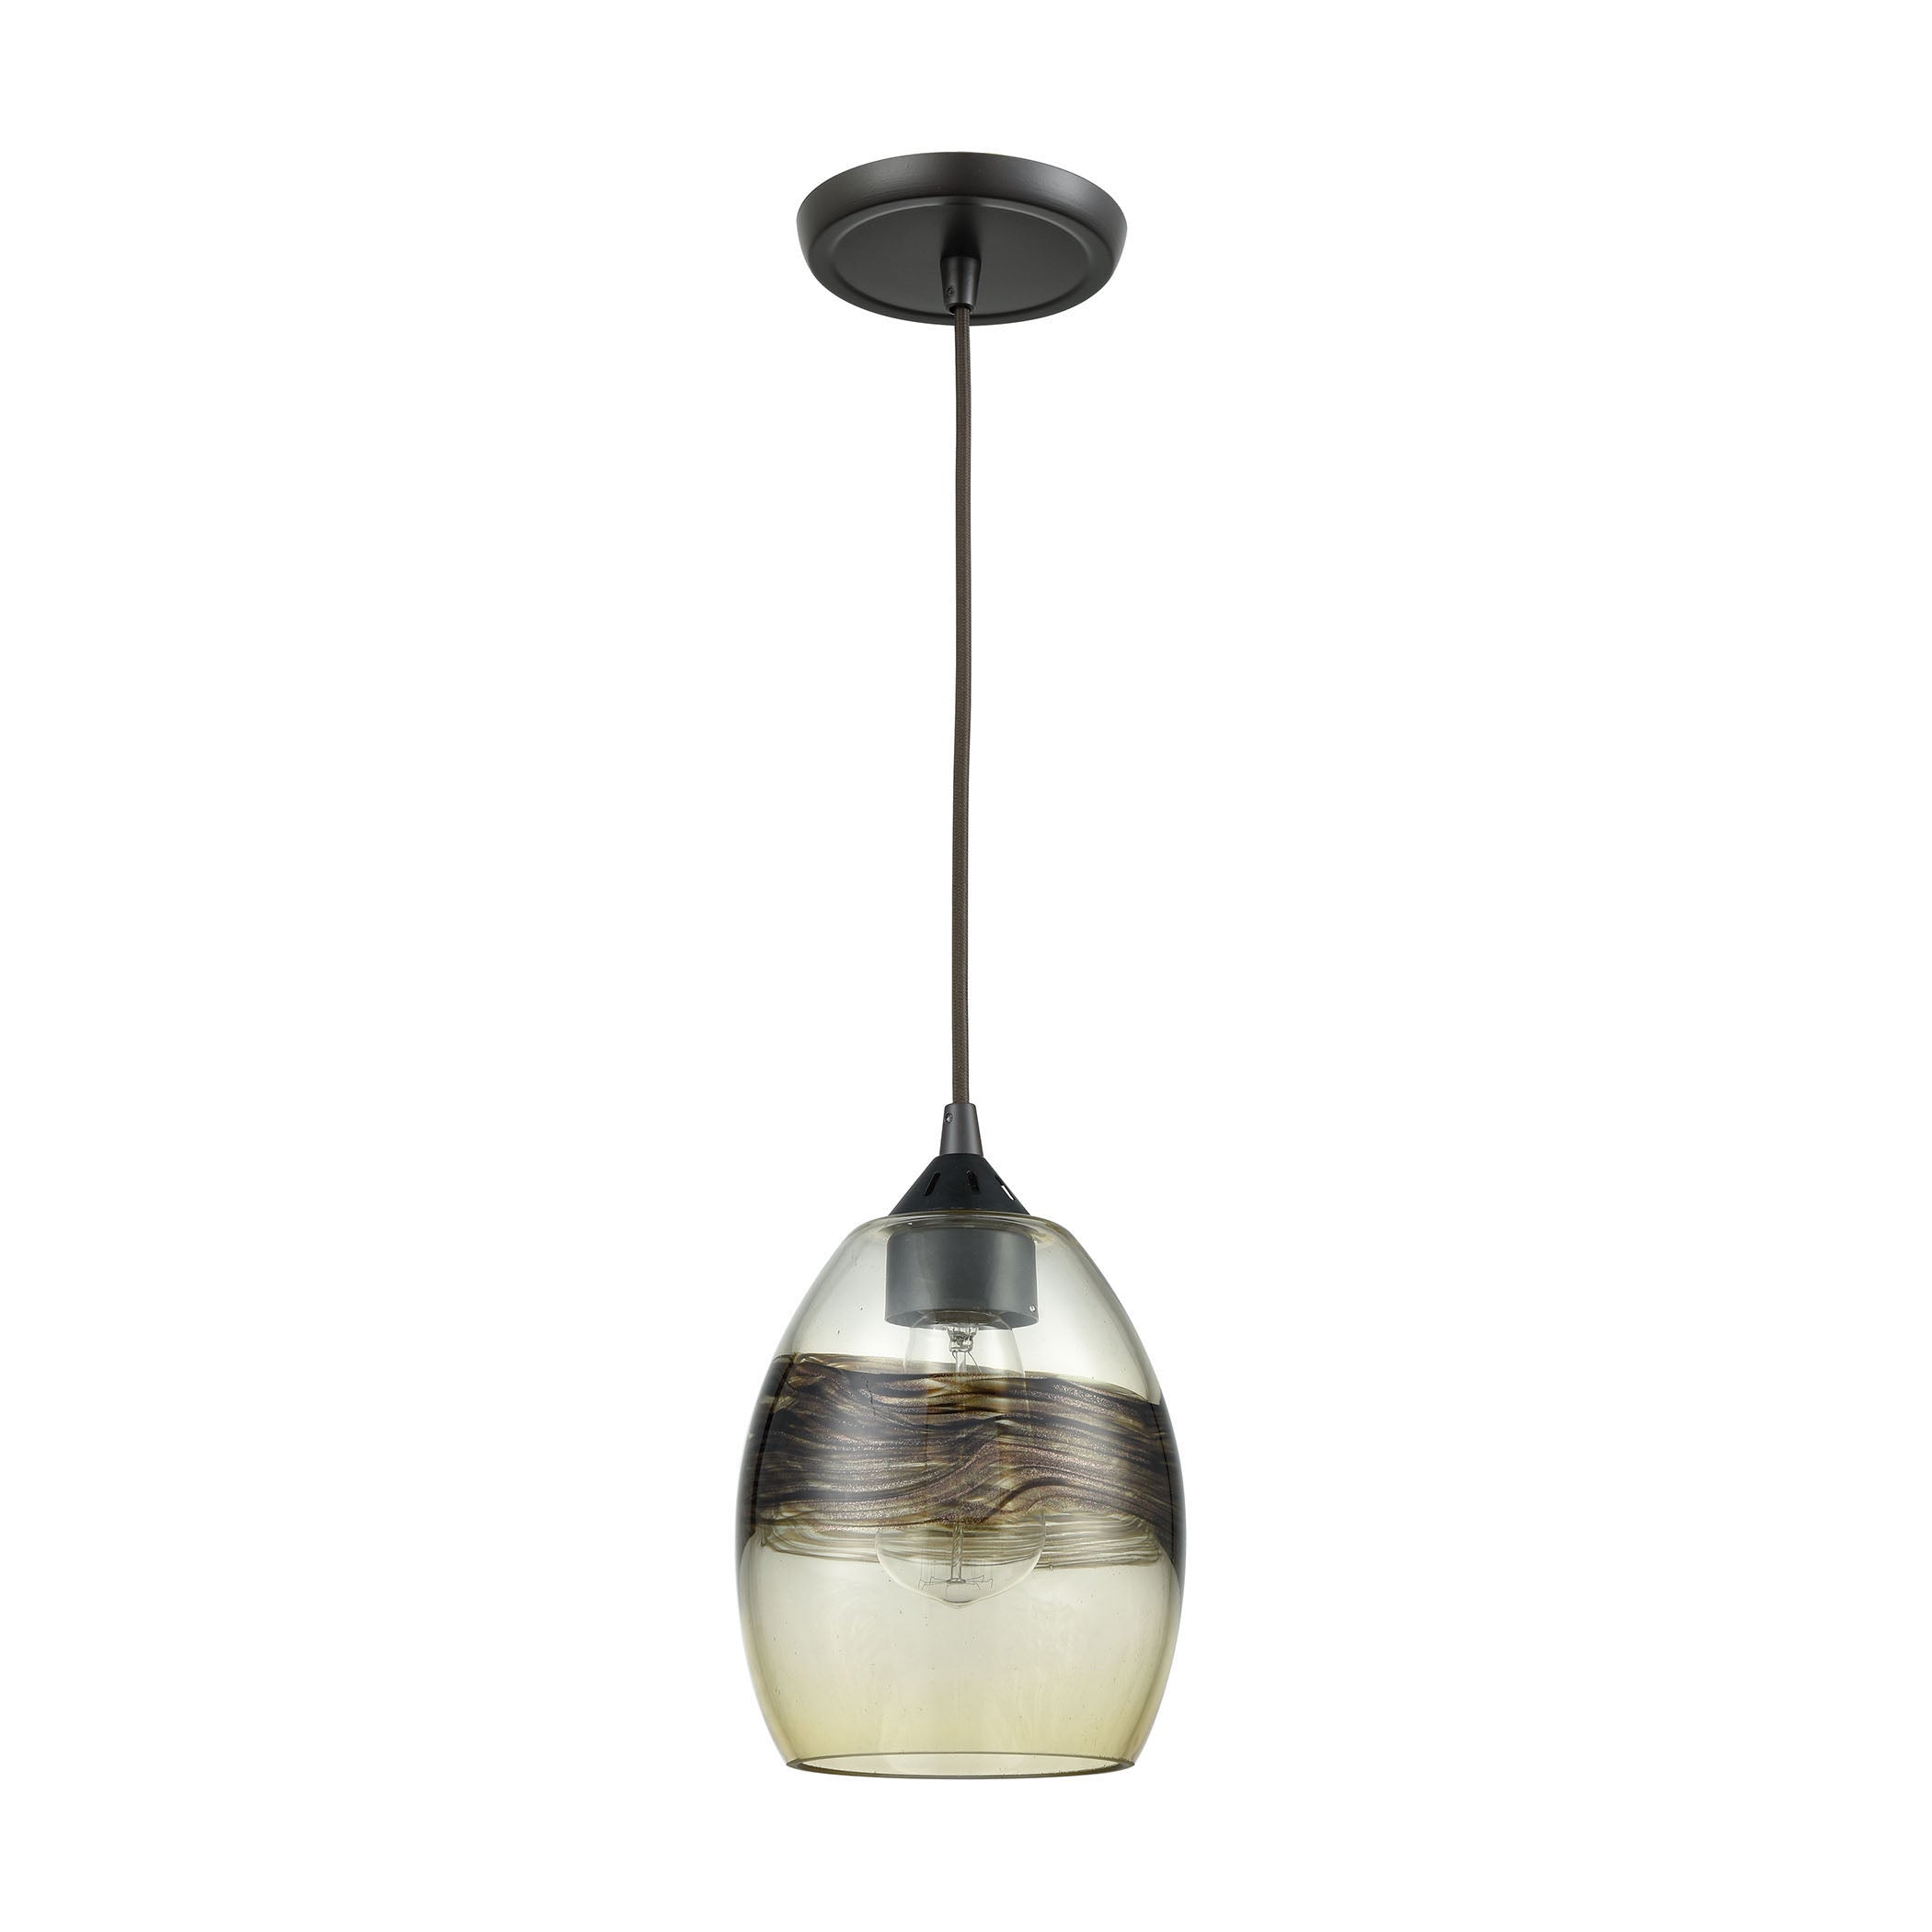 ELK Lighting 25122/1 Whisp 1-Light Mini Pendant in Oil Rubbed Bronze with Champagne-plated Glass